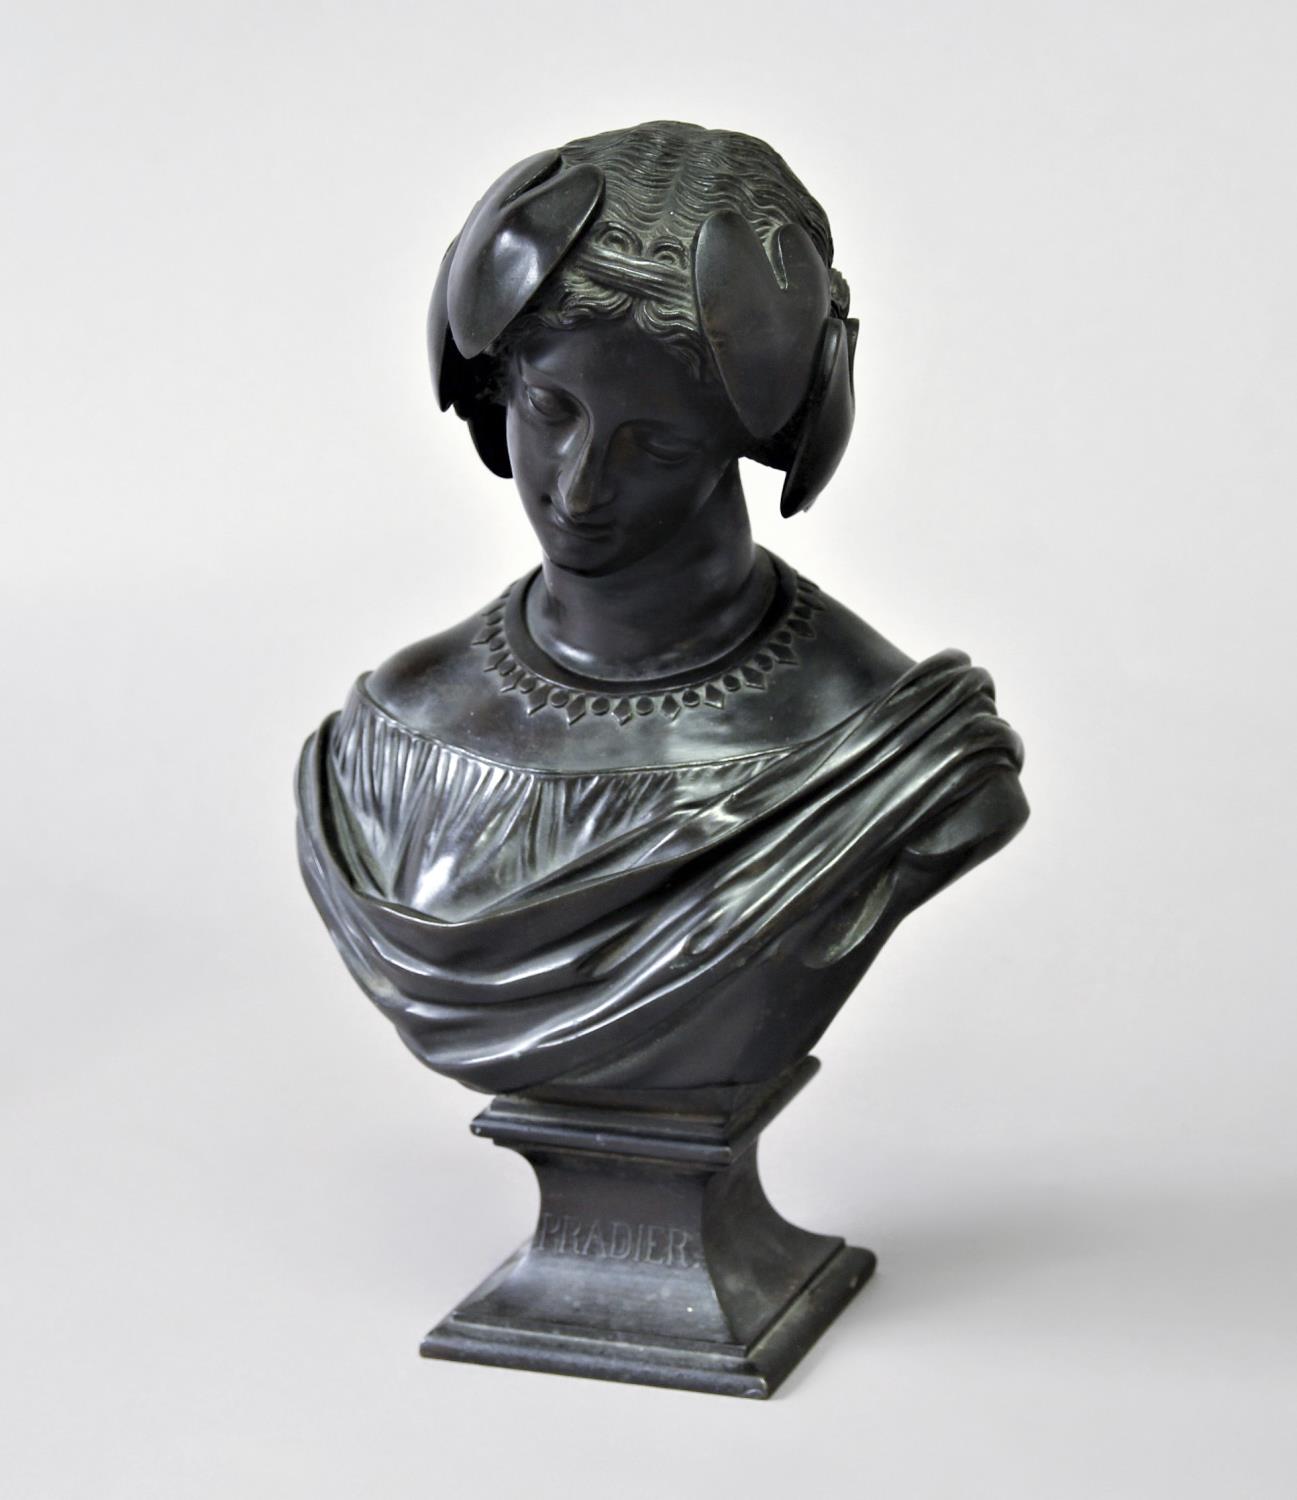 AFTER JAMES PRADIER Bust of Atlanta on a square, socle base inscribed Pradier, bronze, height 28cm